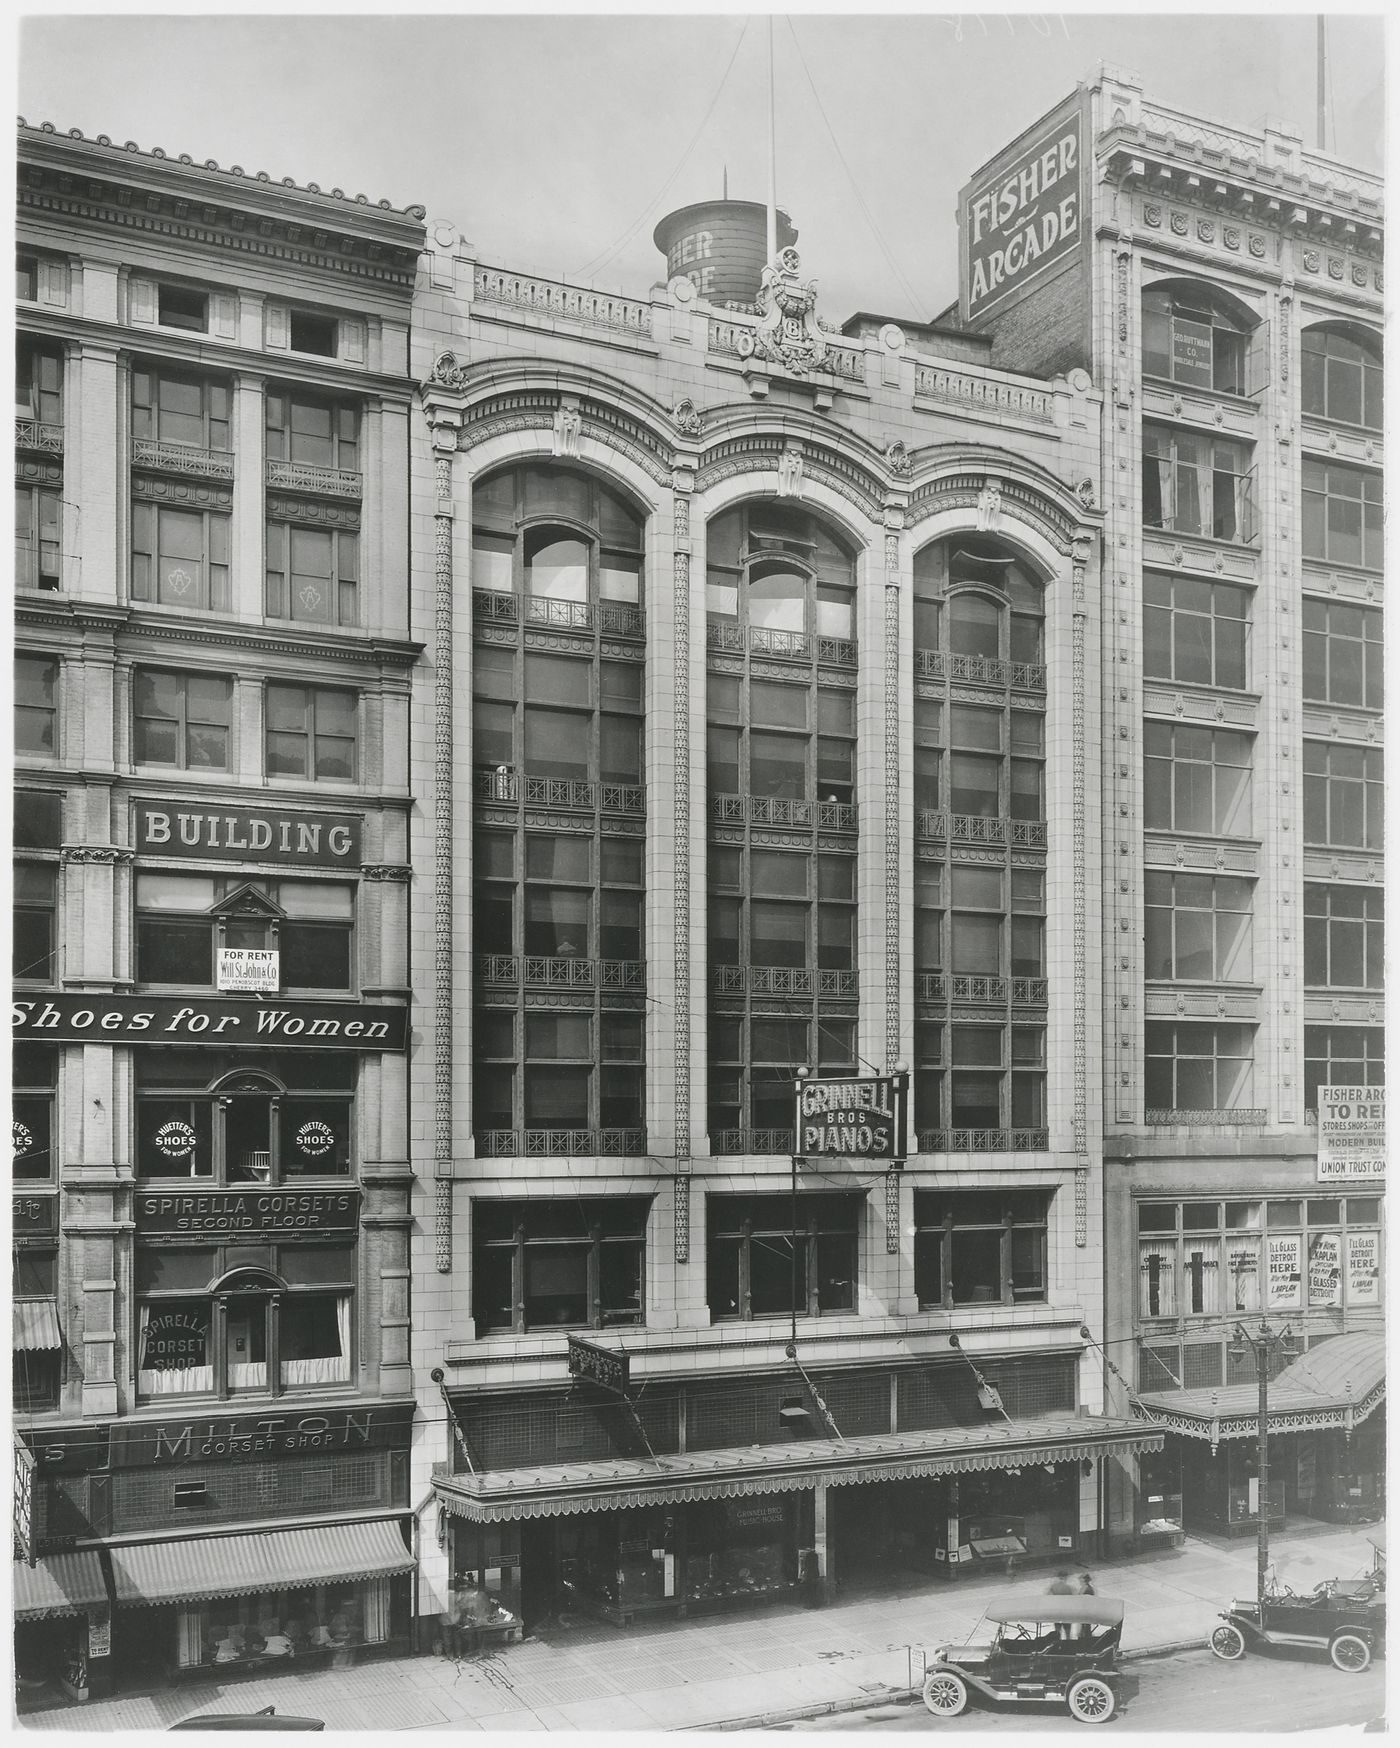 View of the principal façade of the Grinnell Building showing the Grinnell Bros. Music Store, Woodward Avenue, Detroit, Michigan